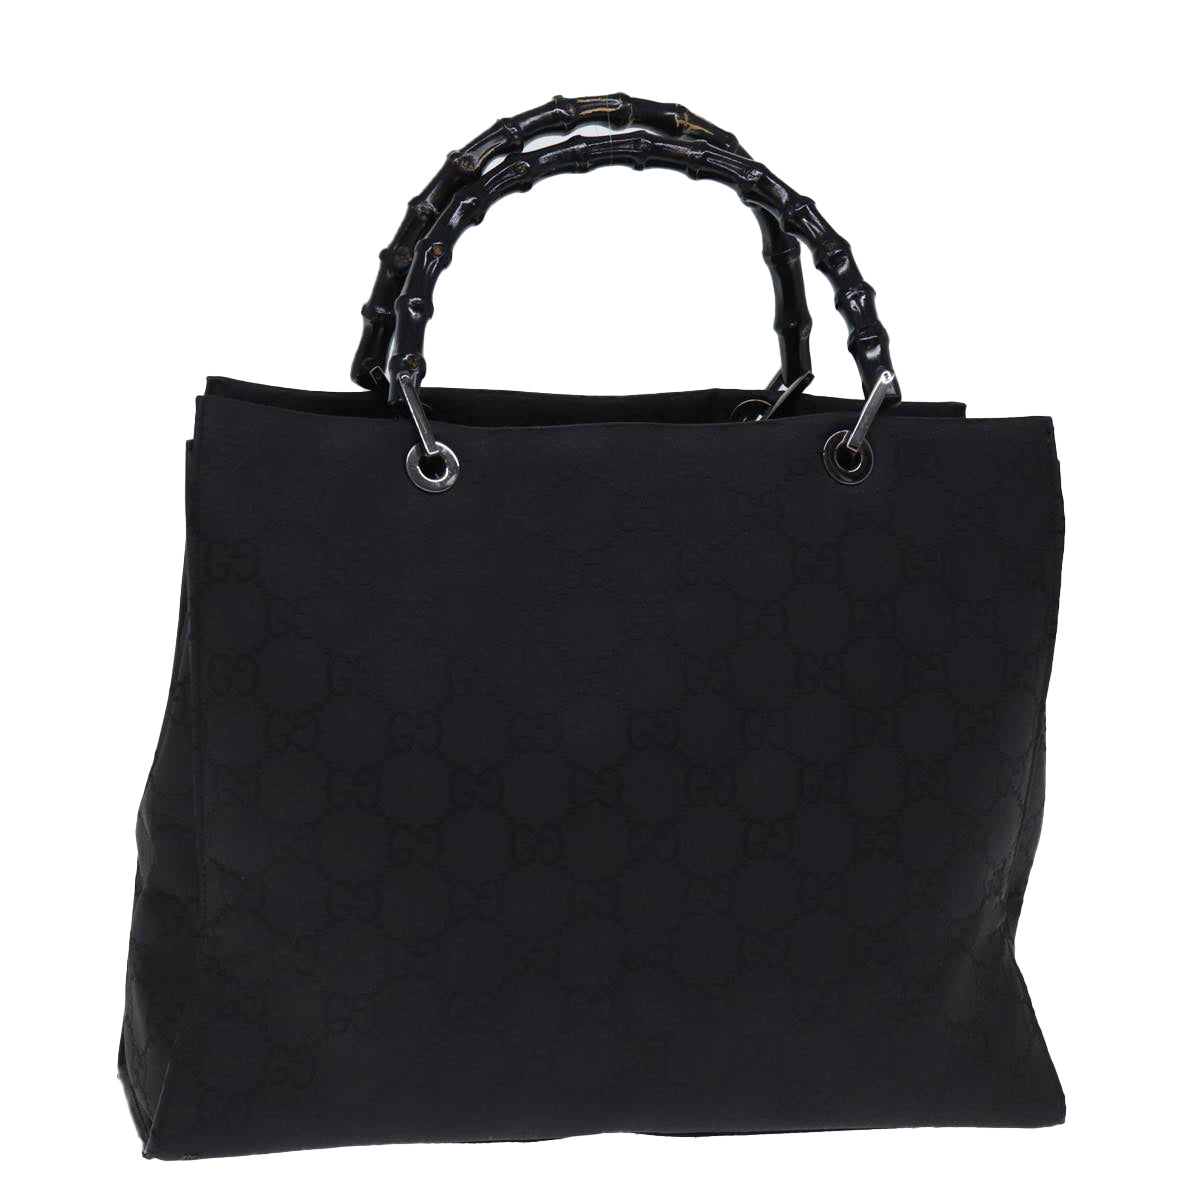 GUCCI Bamboo GG Canvas Hand Bag Black 002 1010 Auth yk12489